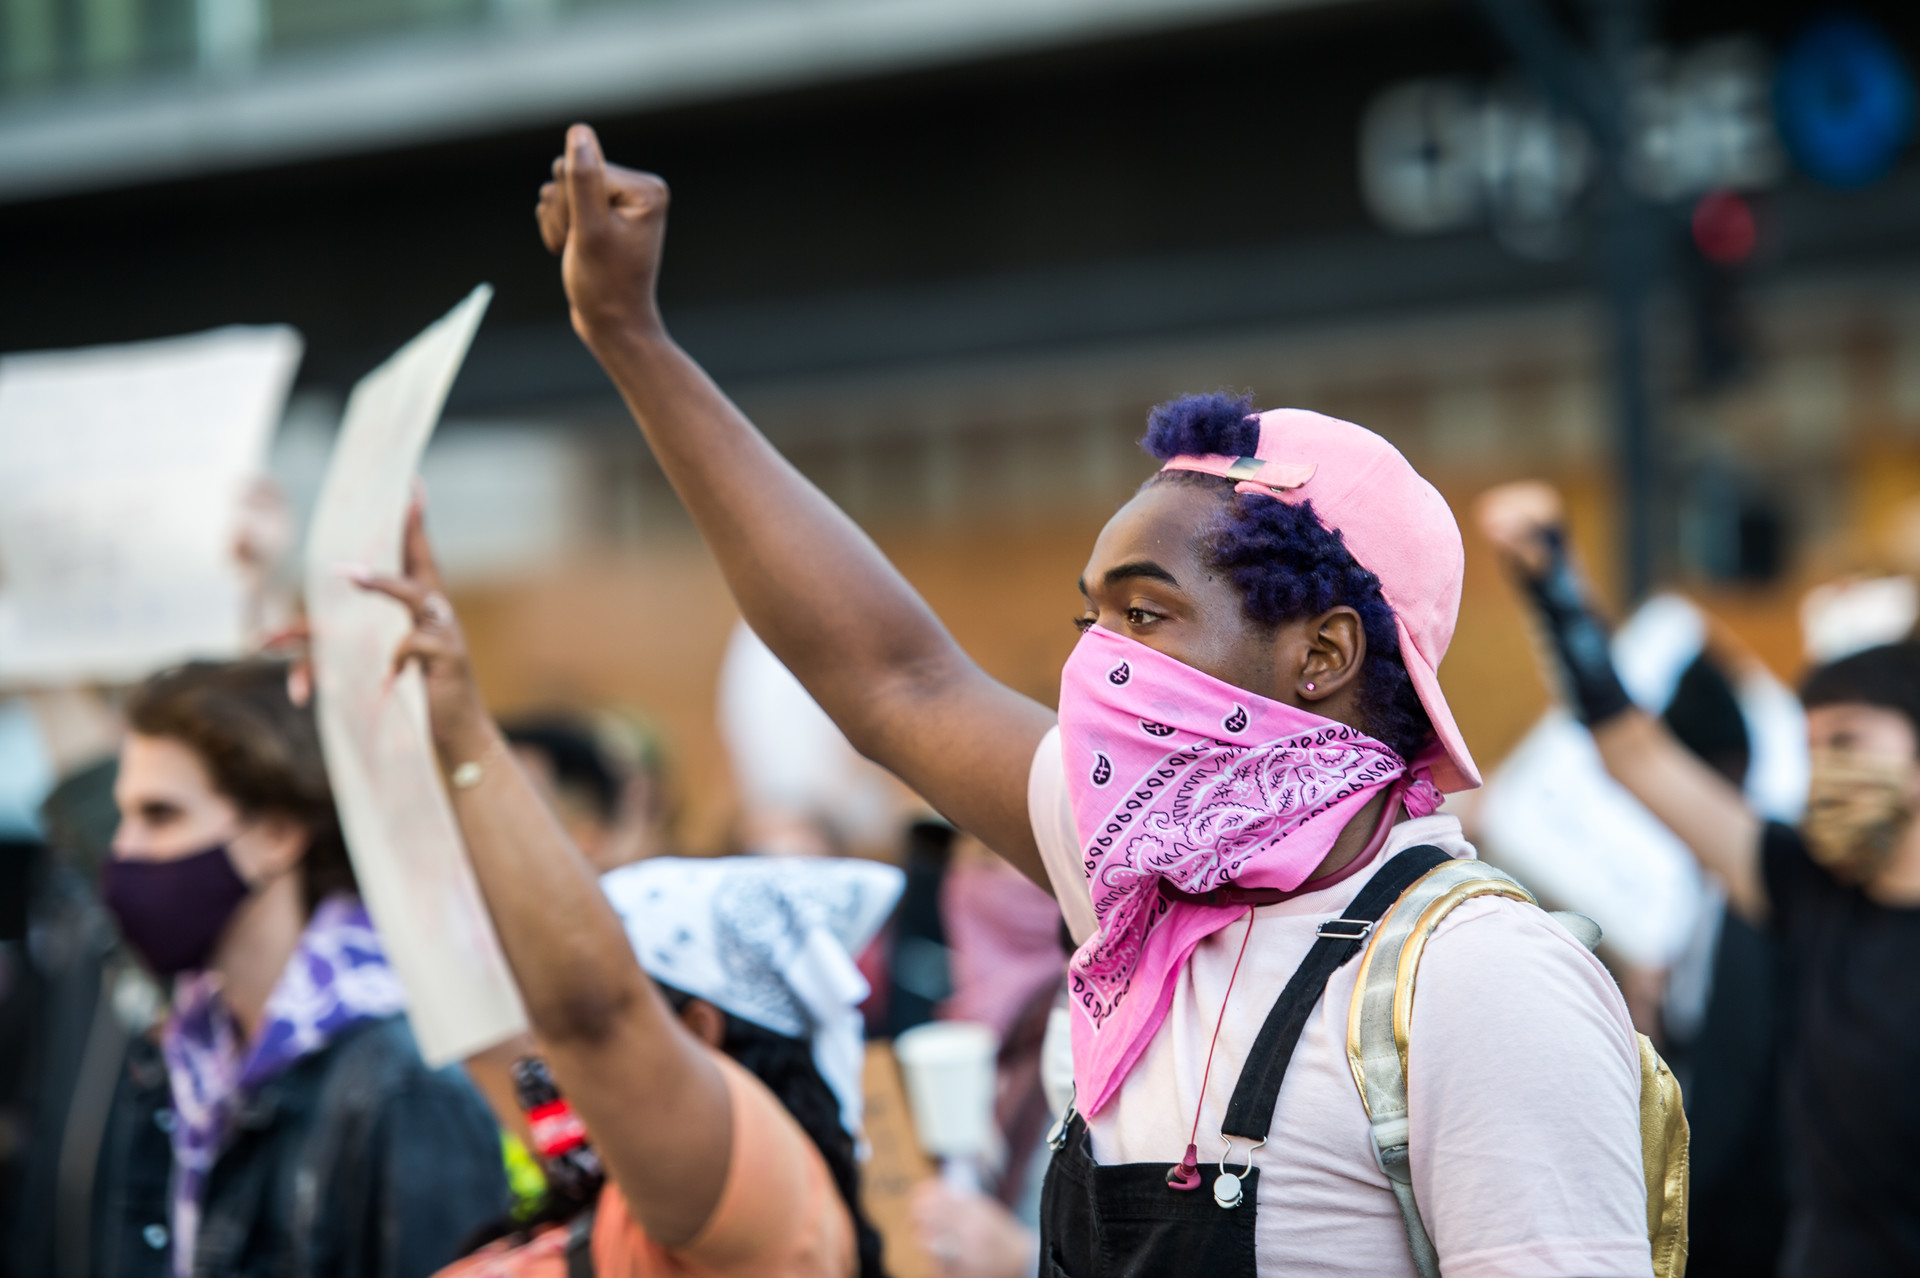 A young Black protester with pink bandana over their faces raises a fist along with other protesters